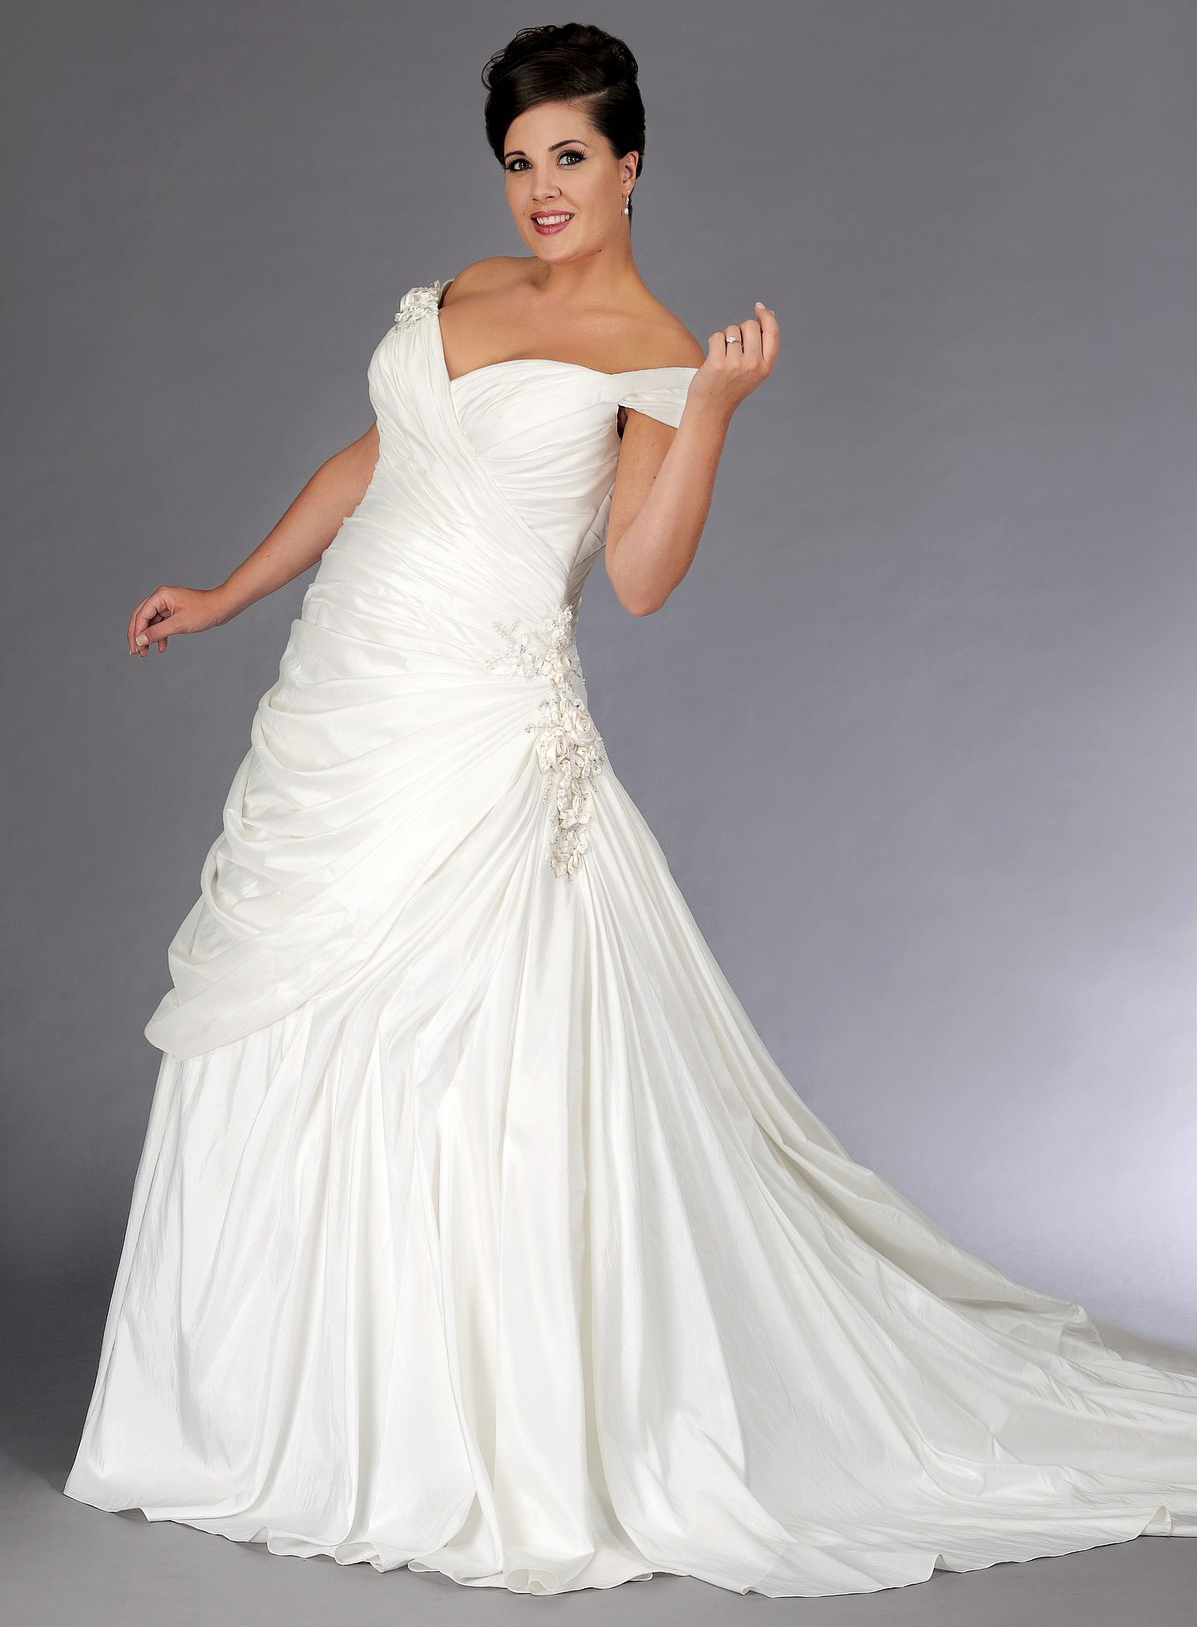 Great Super Plus Size Wedding Dresses Learn more here | greewedding1